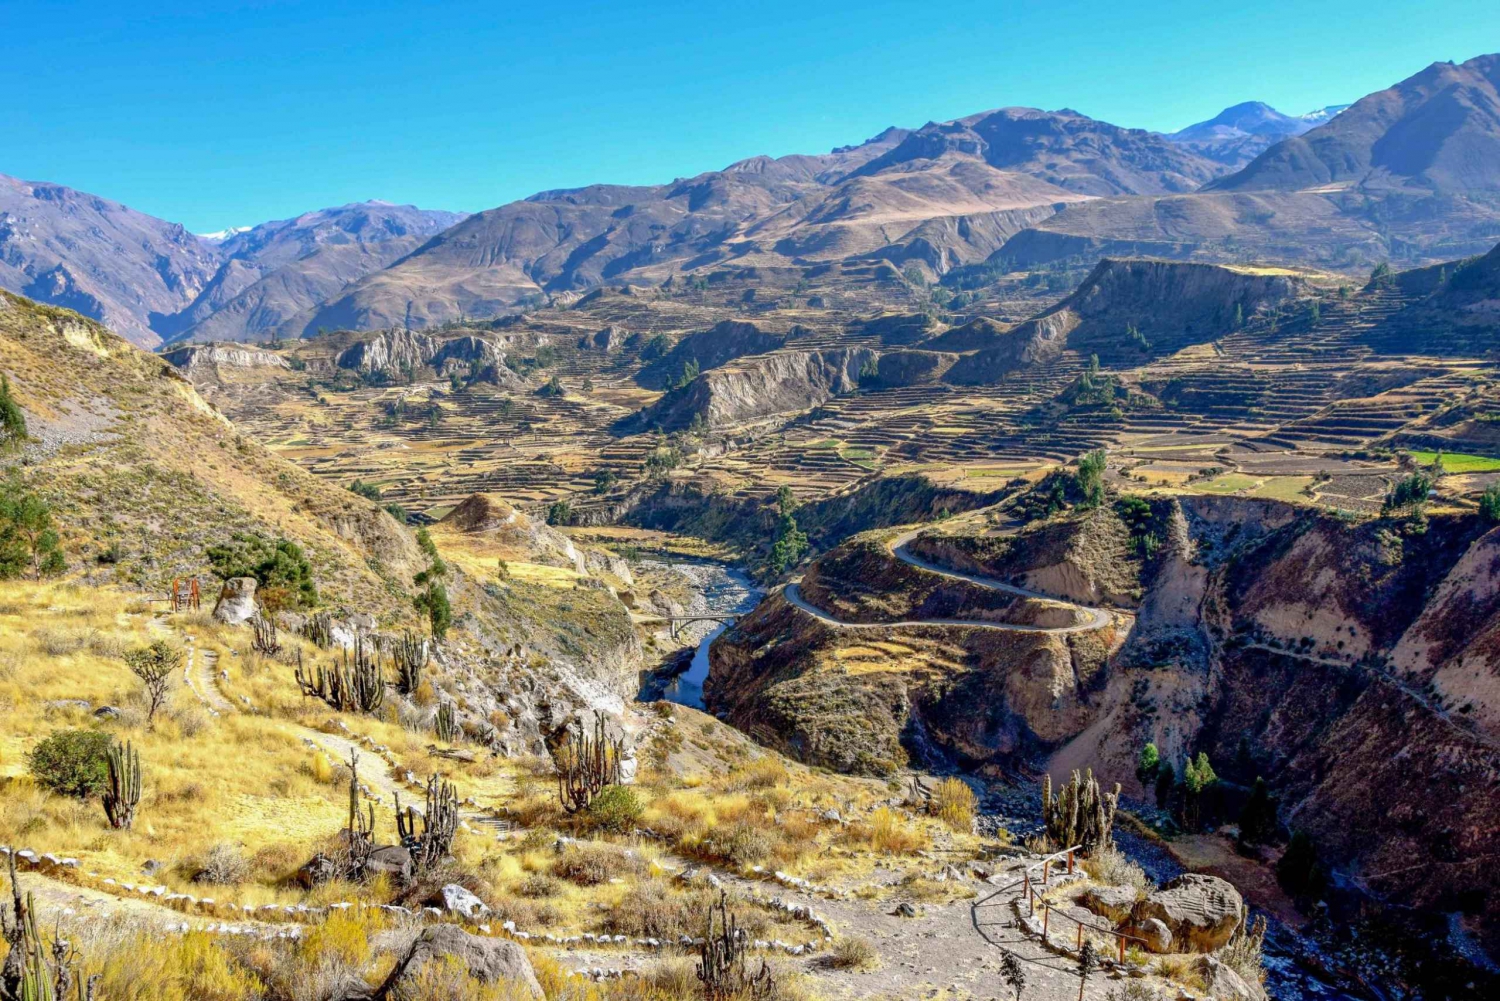 Andes: Colca Canyon Day-Trip